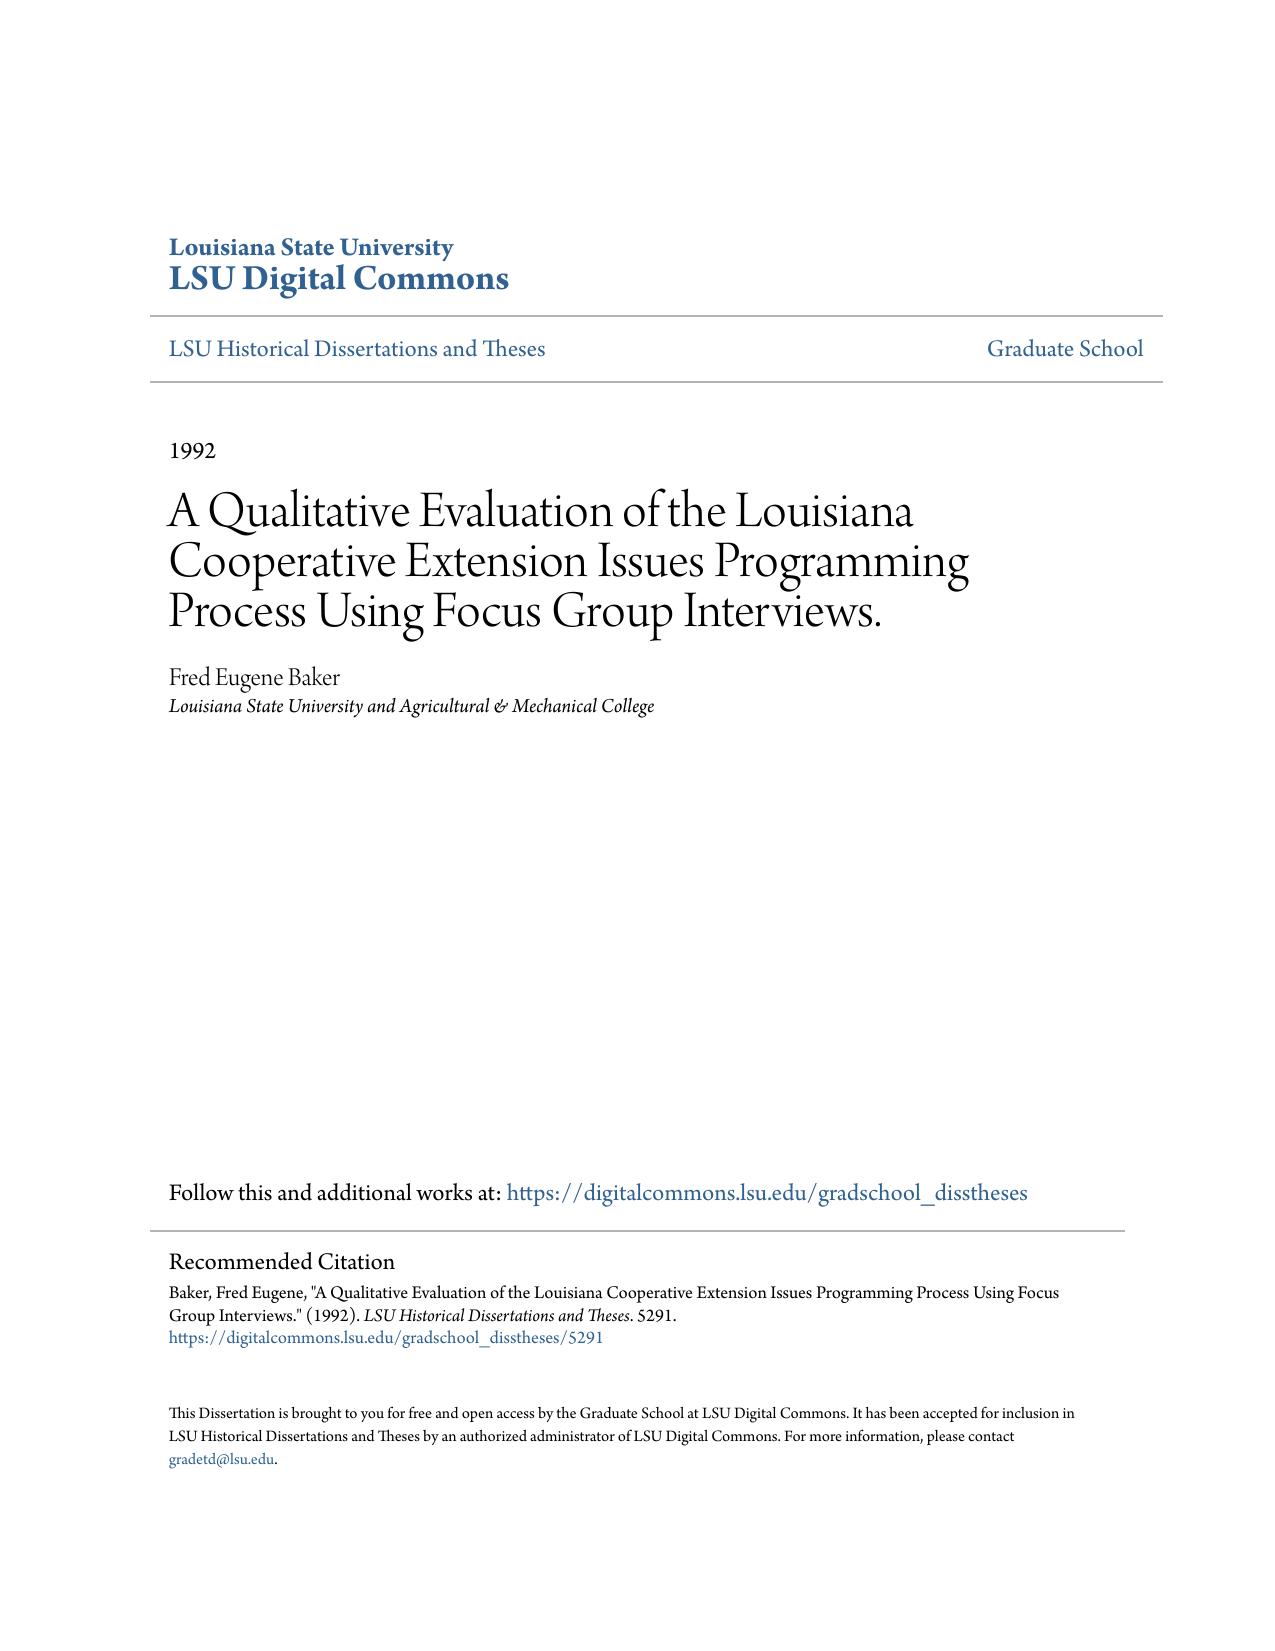 A Qualitative Evaluation of the Louisiana Cooperative Extension Issues Programming Process Using Focus Group Interviews.